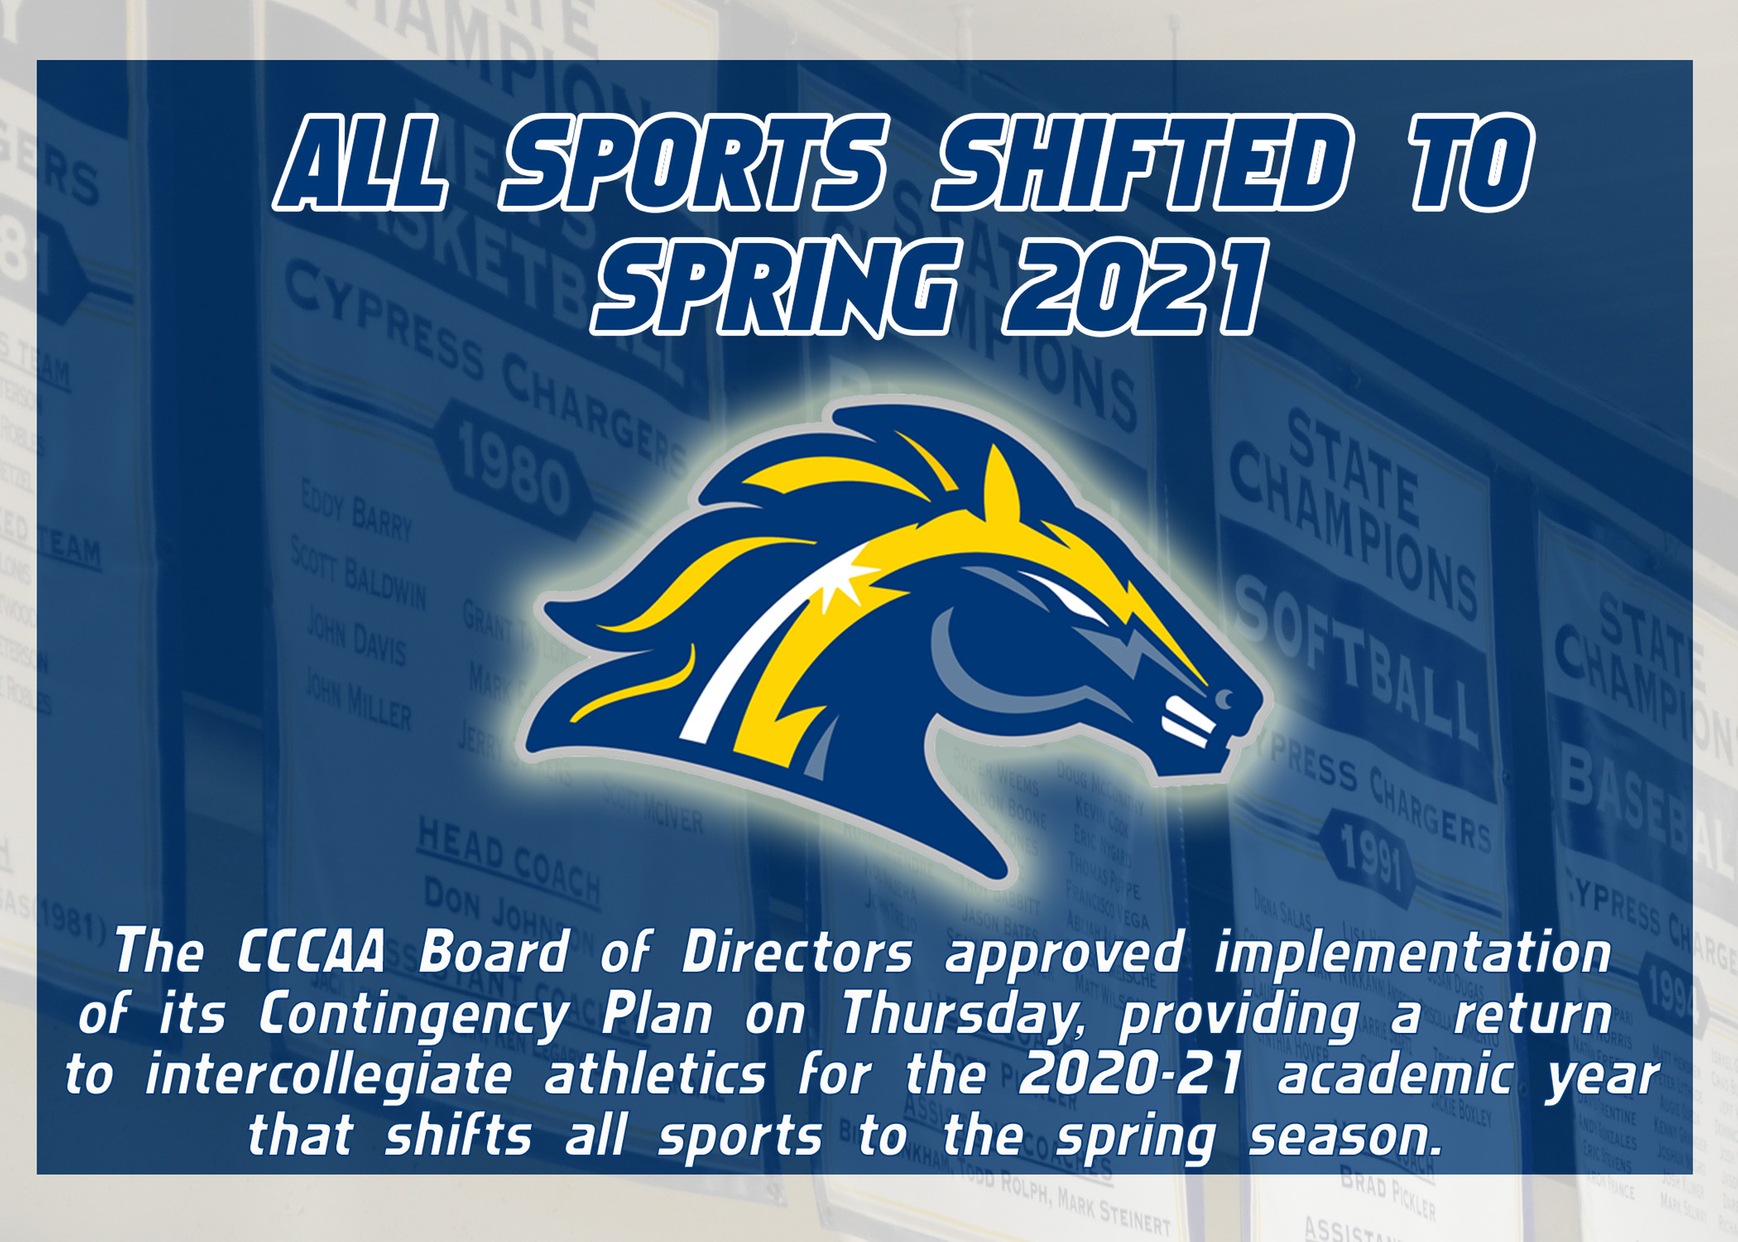 CCCAA Board of Directors Adjusted Contingency Plan Approved, Shifts All Sports to Spring